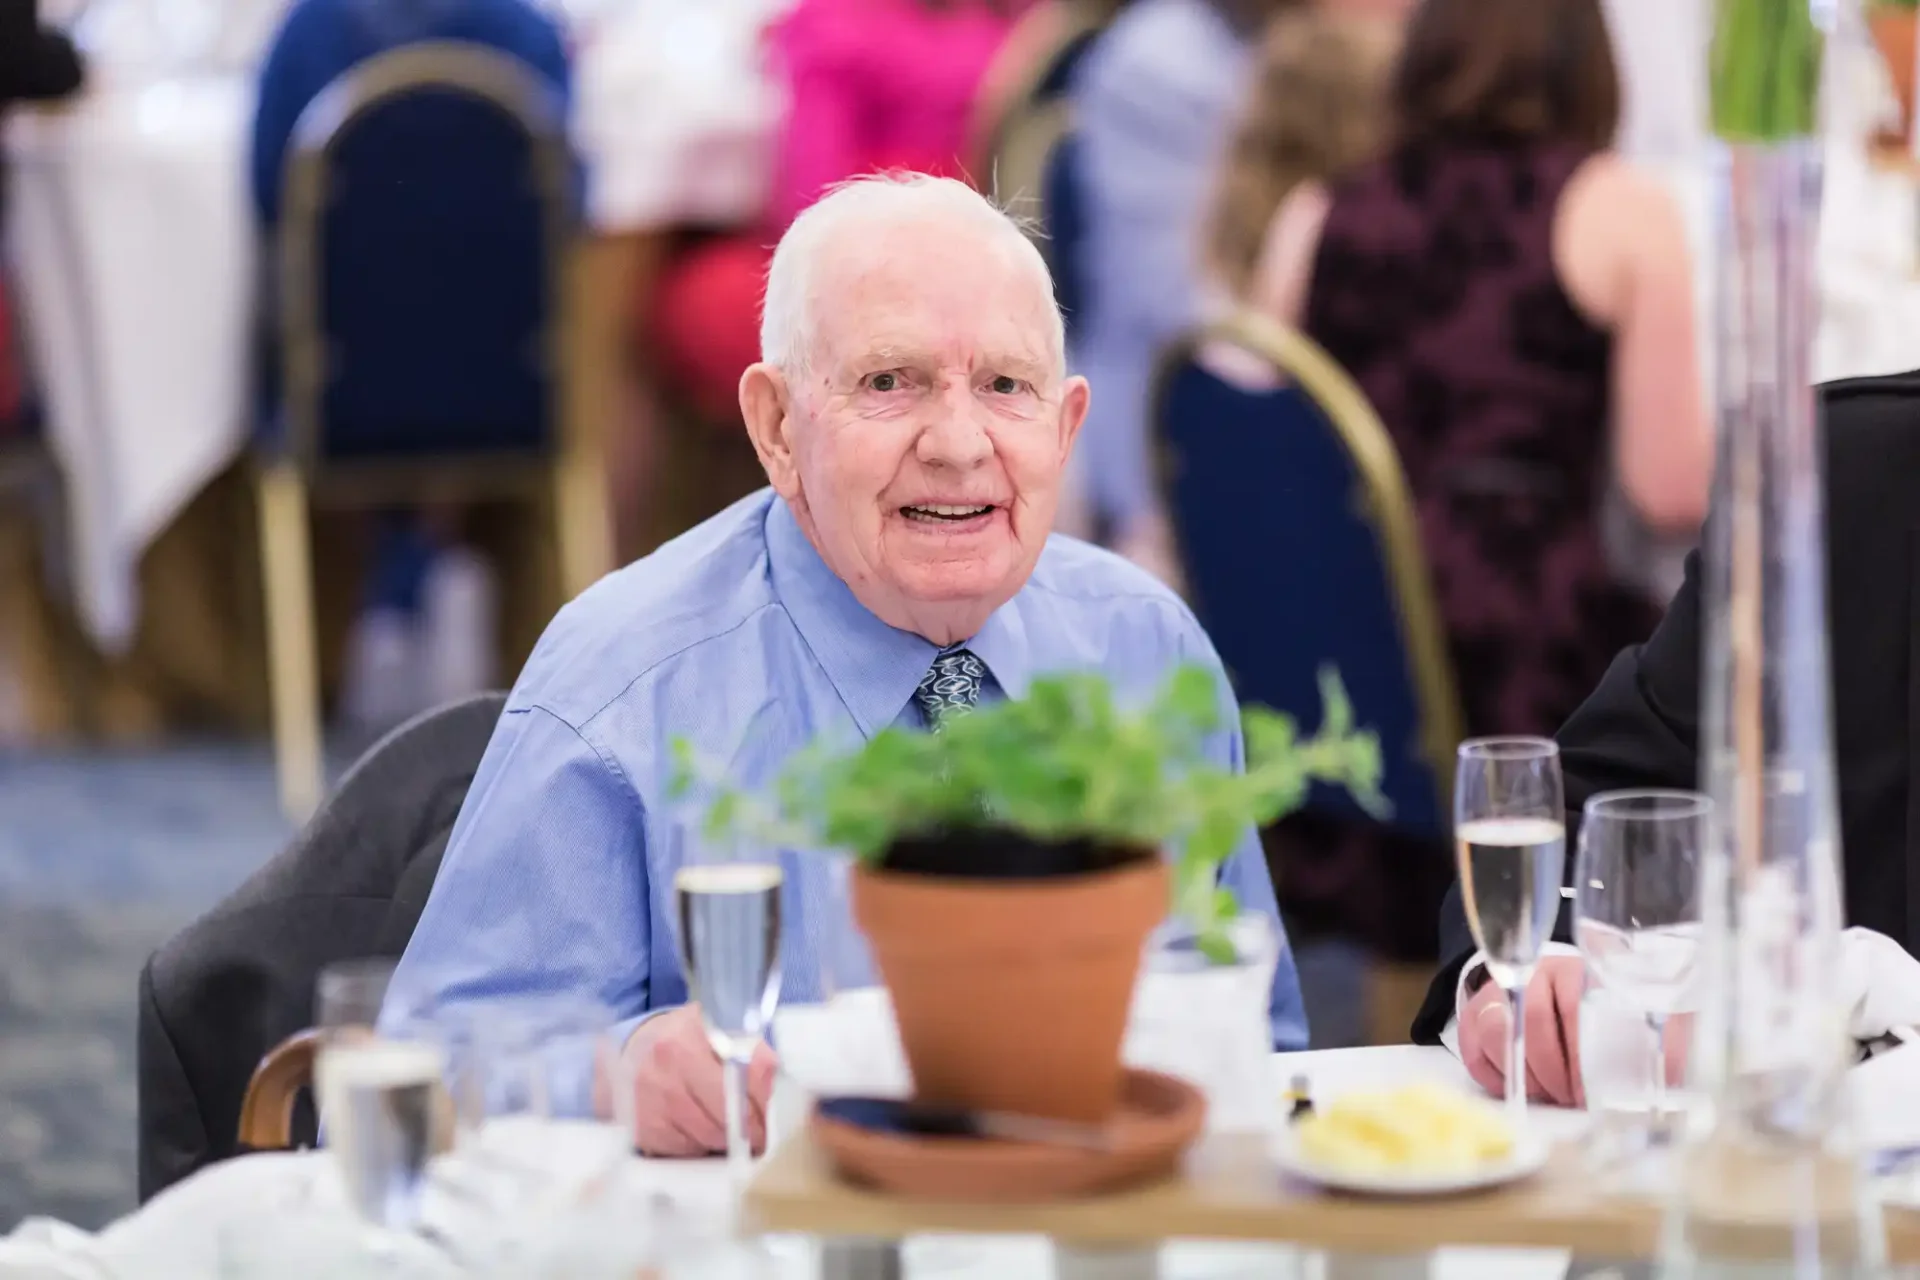 Elderly man in a blue shirt sitting at a banquet table, smiling, with a champagne glass and decorative plant in front of him.